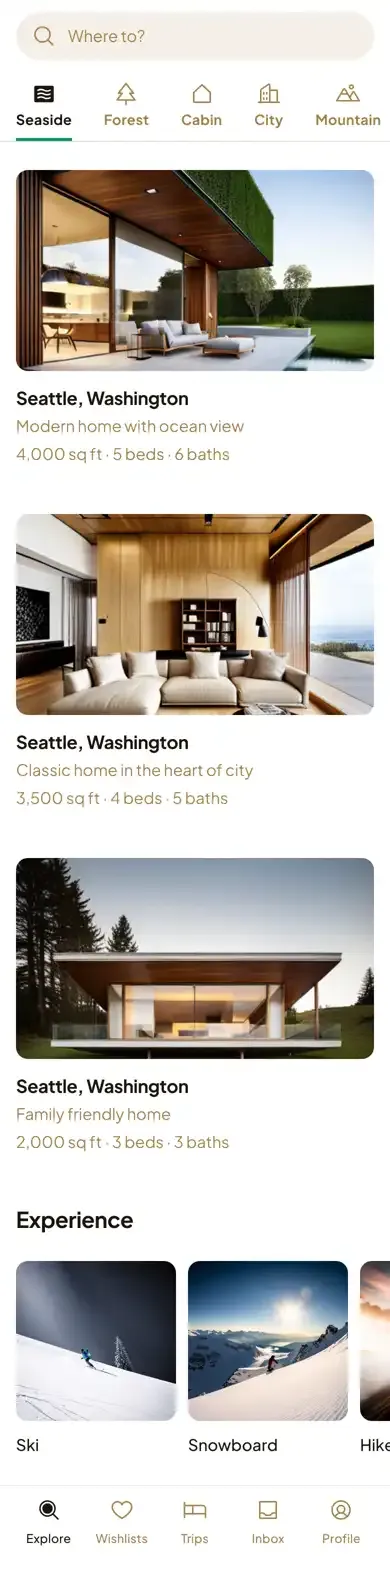 home page for real estate app, focusing on popular homes in seattle